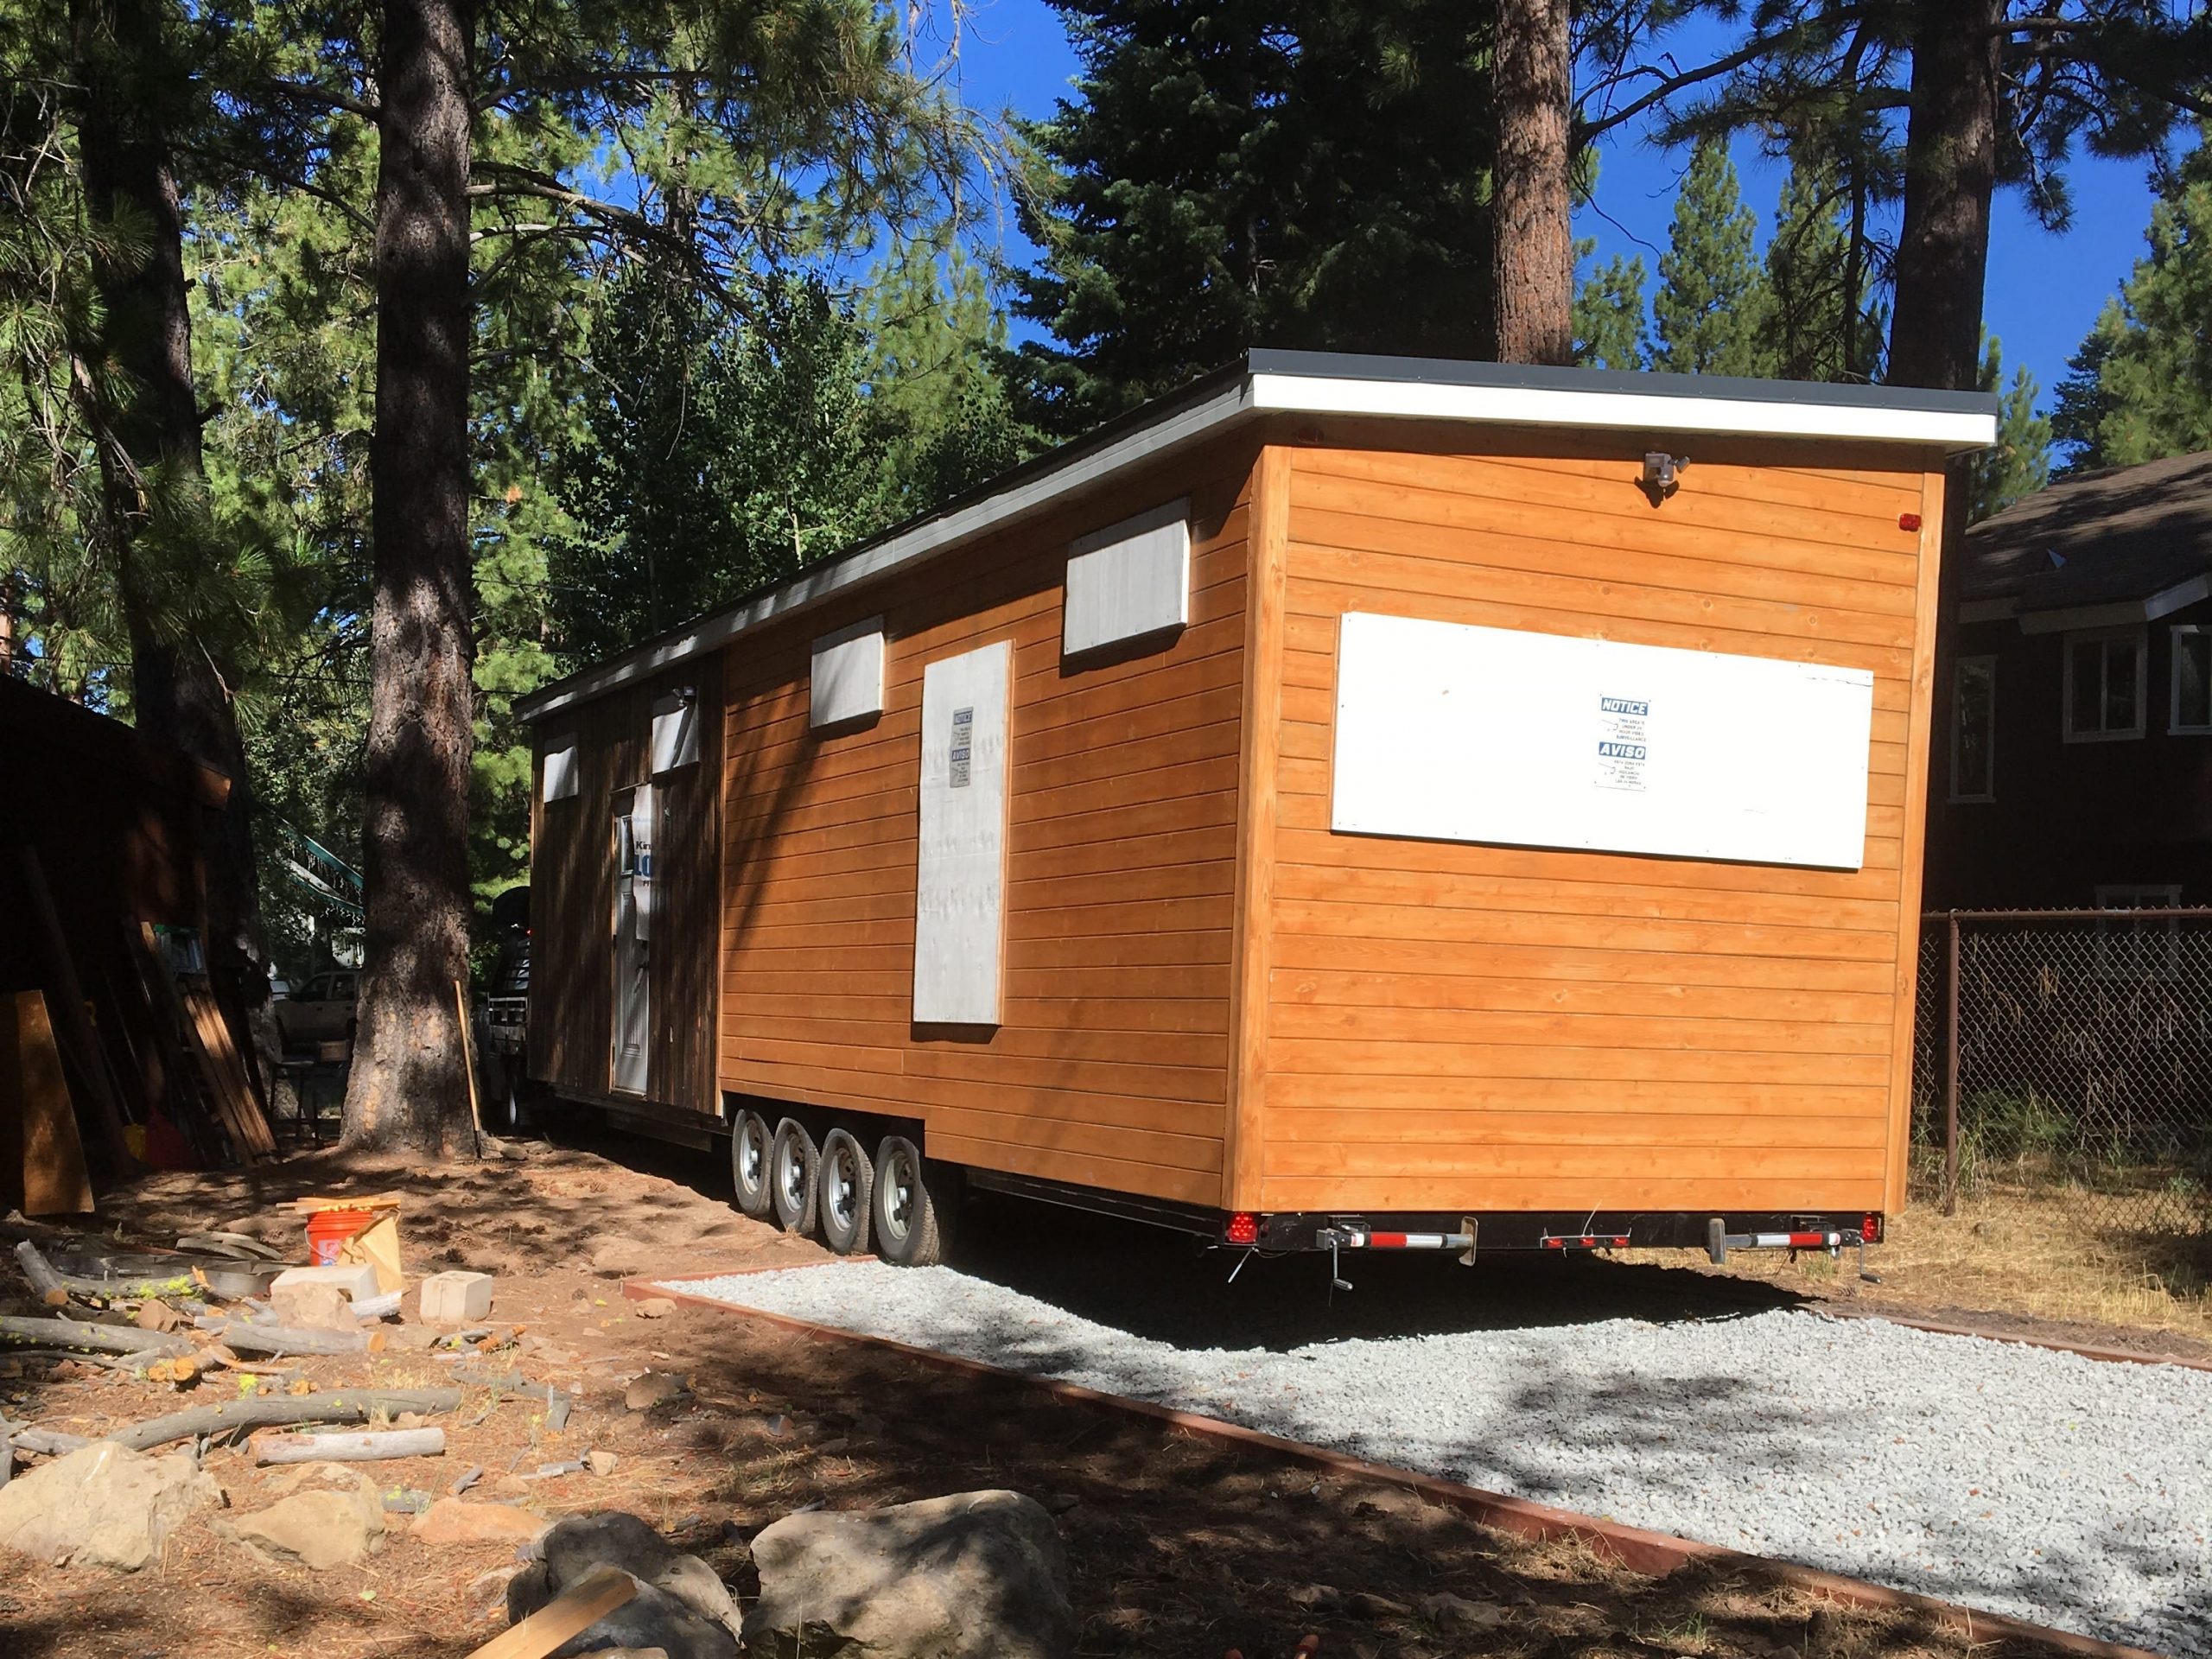 partially built tiny home on a railer in a forested area